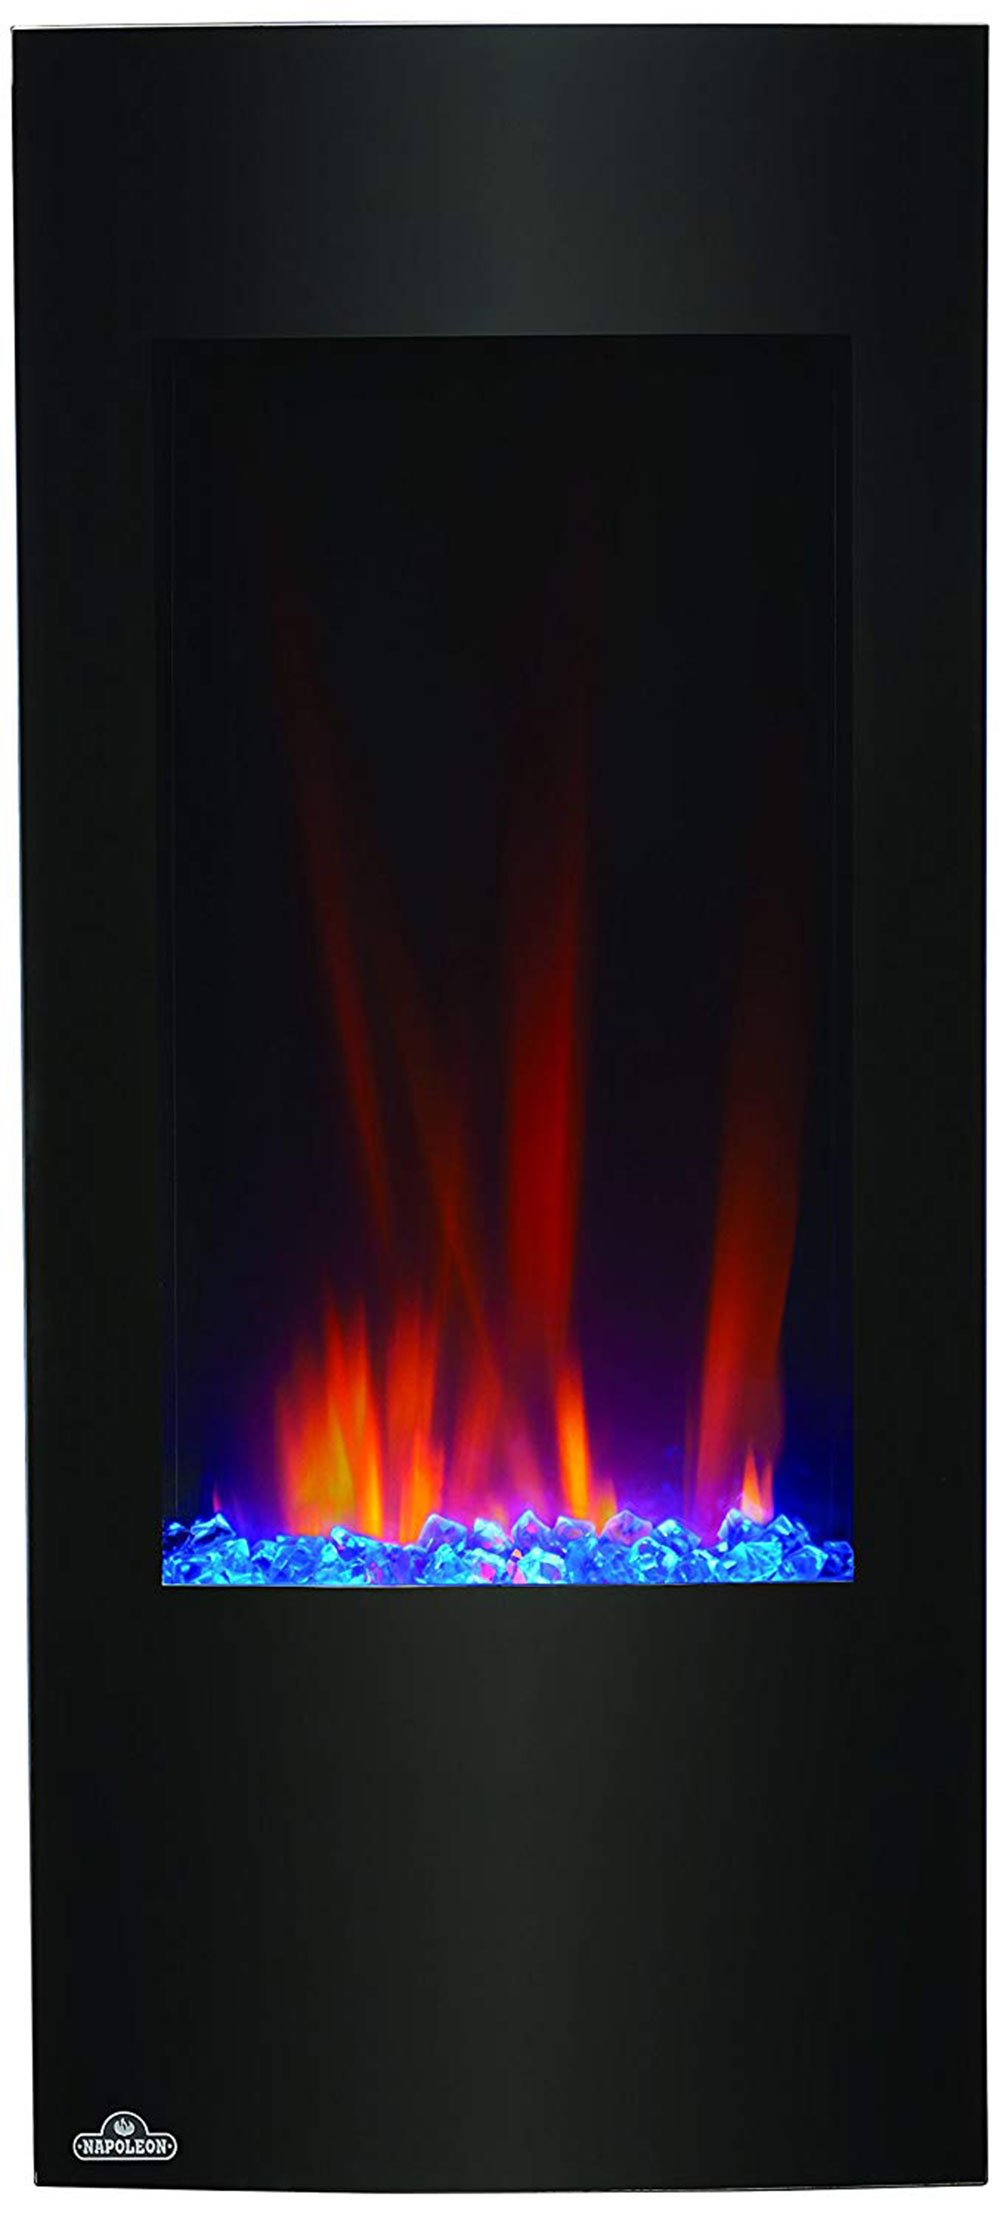 Napoleon-NEFV38H-Vertical-Wall-Mount-Electric-Fireplace-38-Inch Searching for the best electric fireplace? Here are the best ones